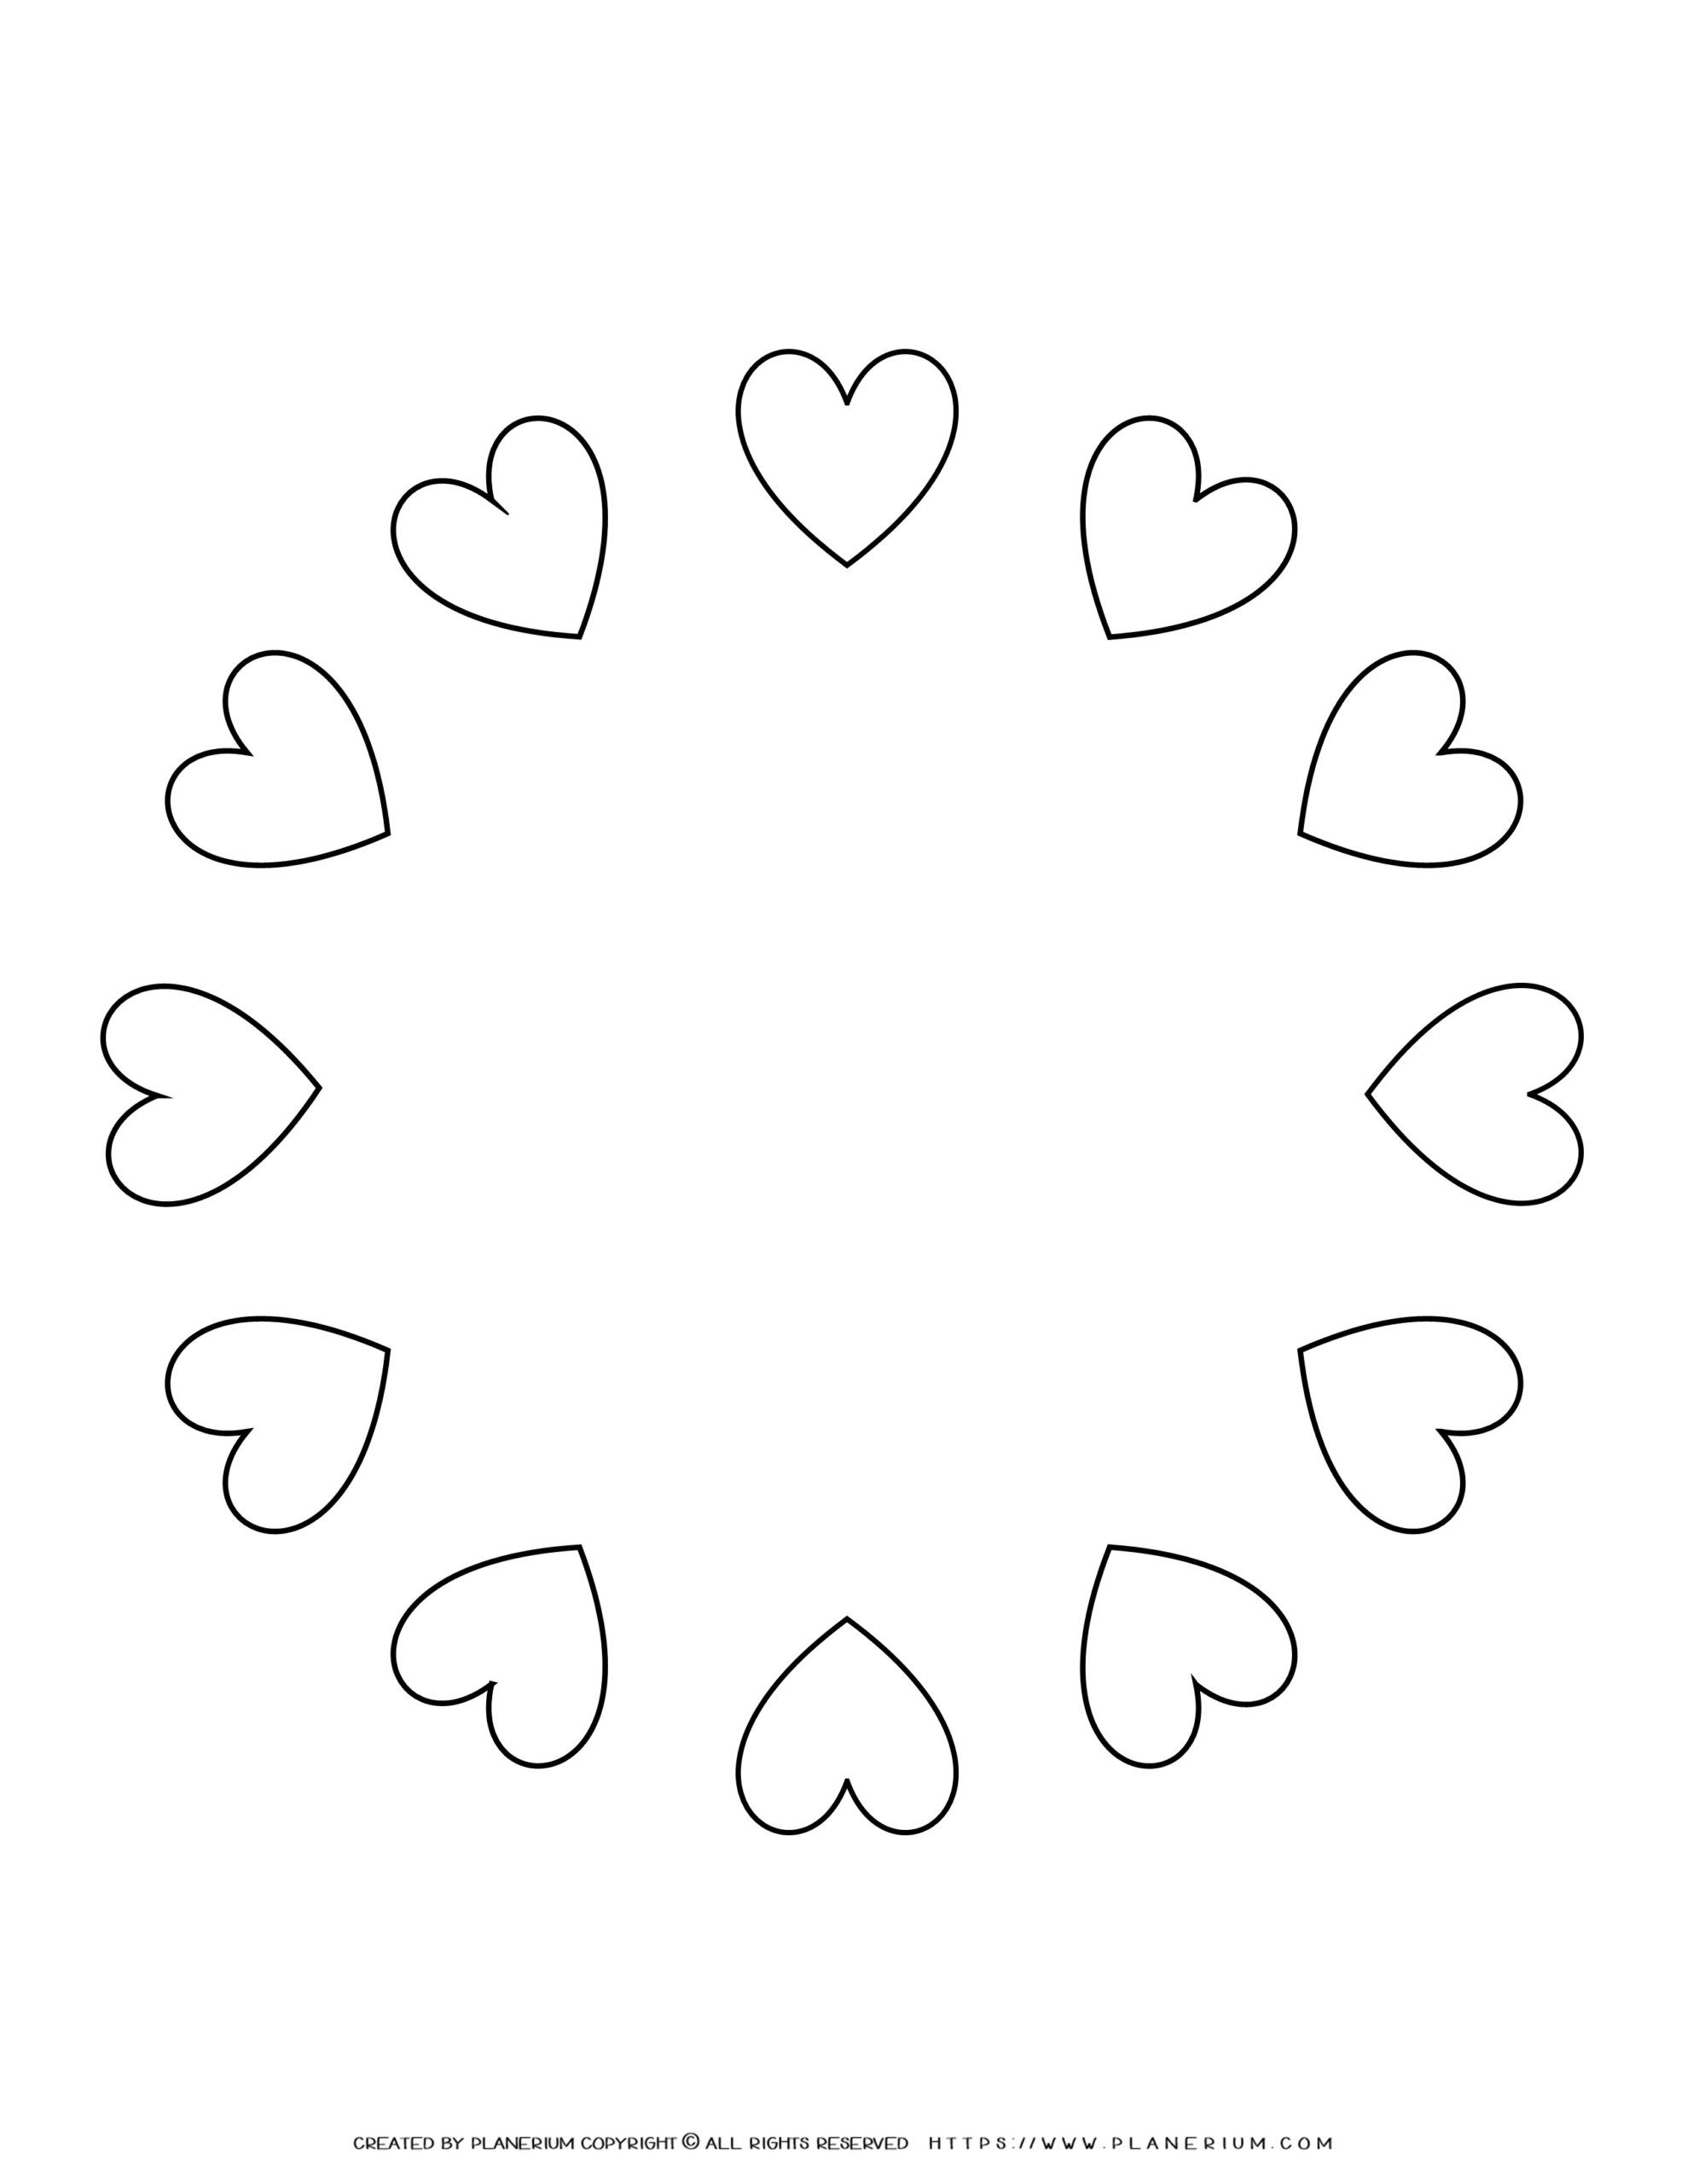 All Seasons - Coloring page - Circle of Twelve Hearts